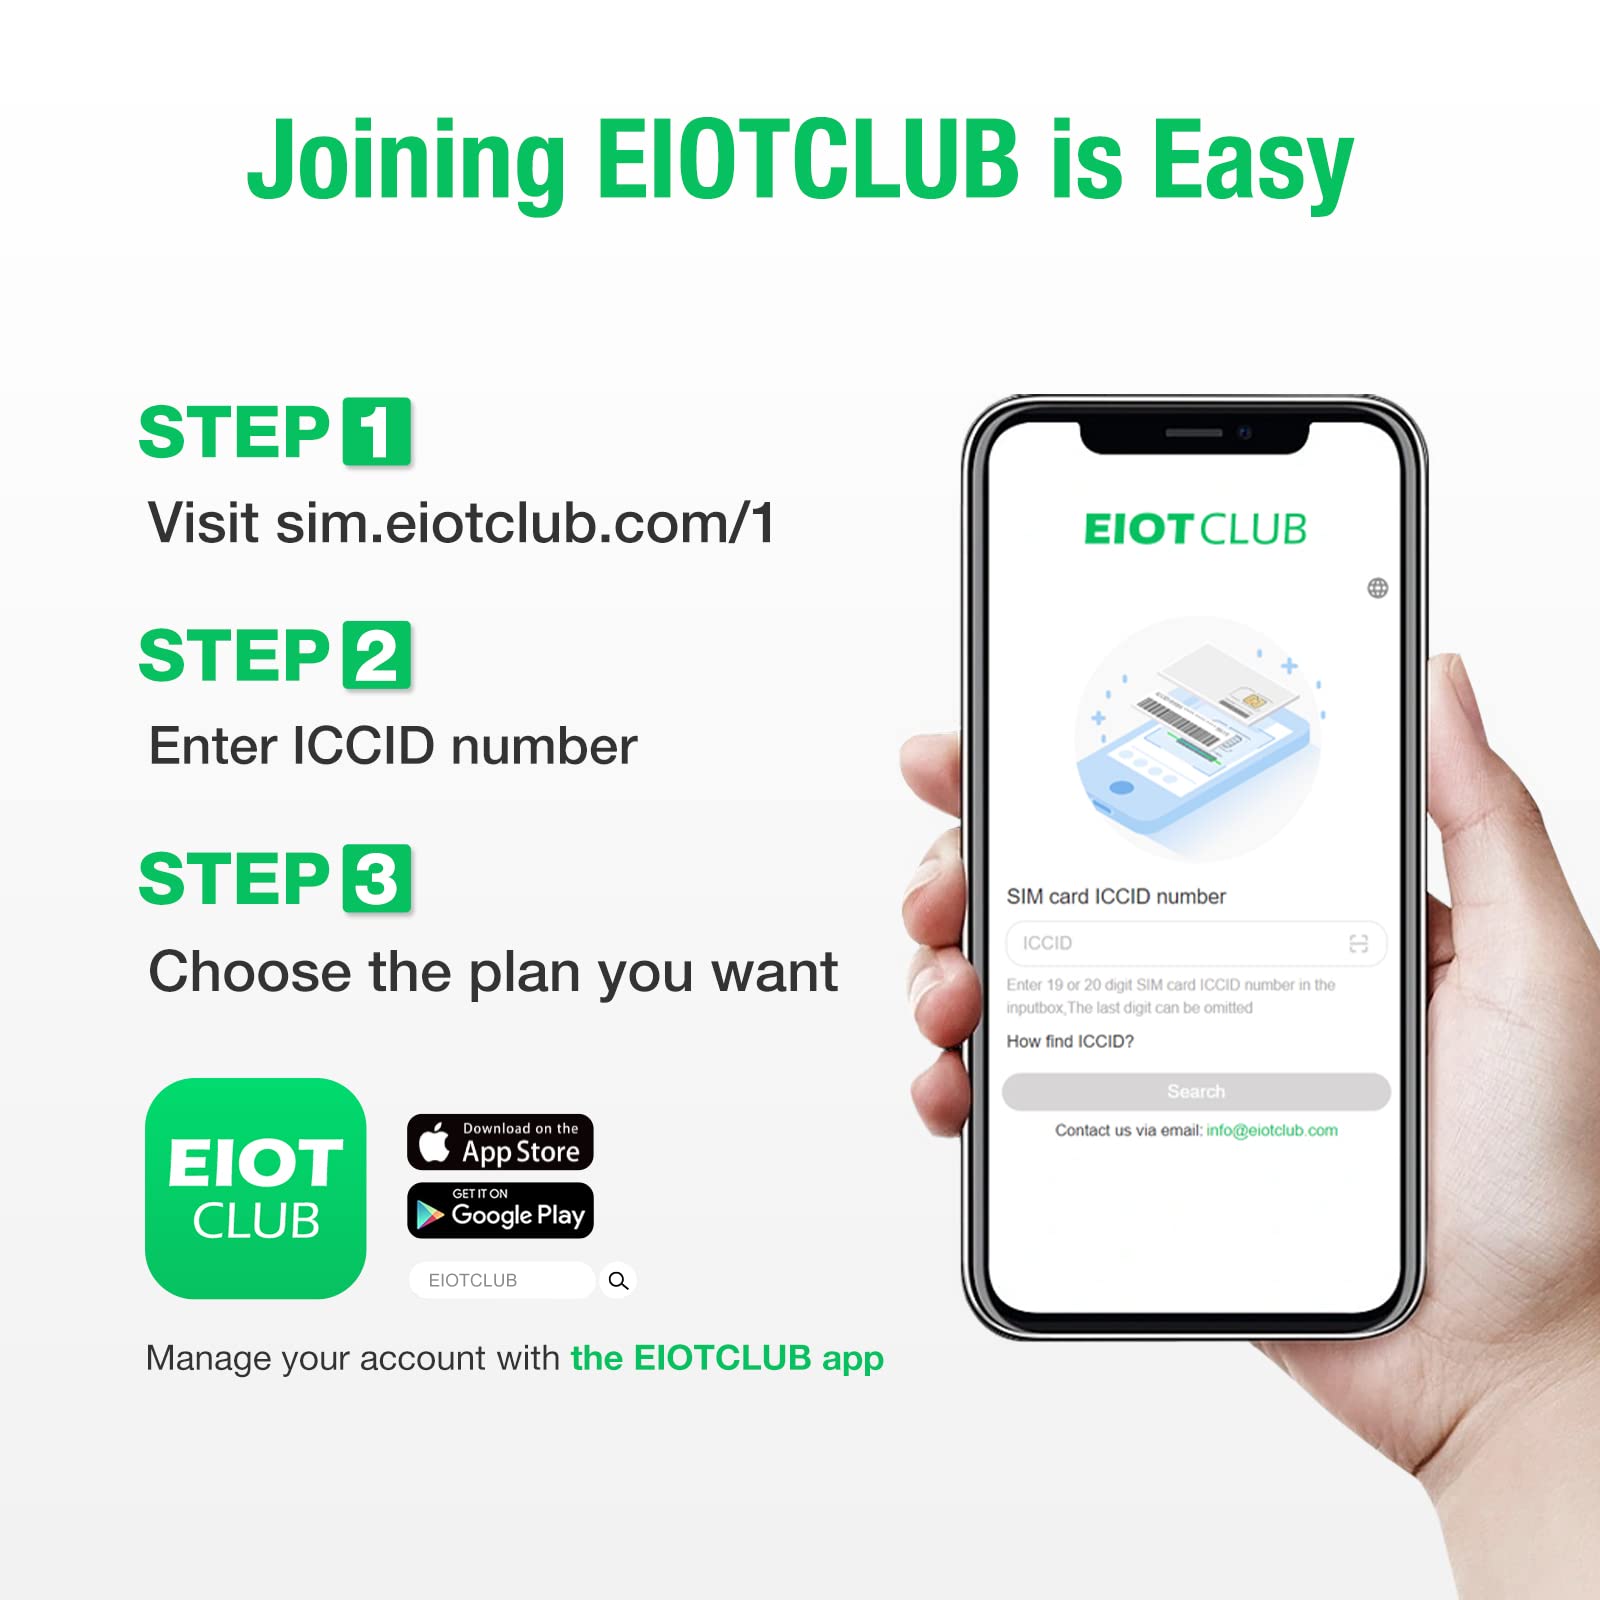 EIOTCLUB Data SIM Card 4G LTE Support AT&T, T-Mobile and Verizon Network for Cellular Security Camera Hunting Camera 4G Router Unlocked IoT Device (No Phone Number, Data Only)